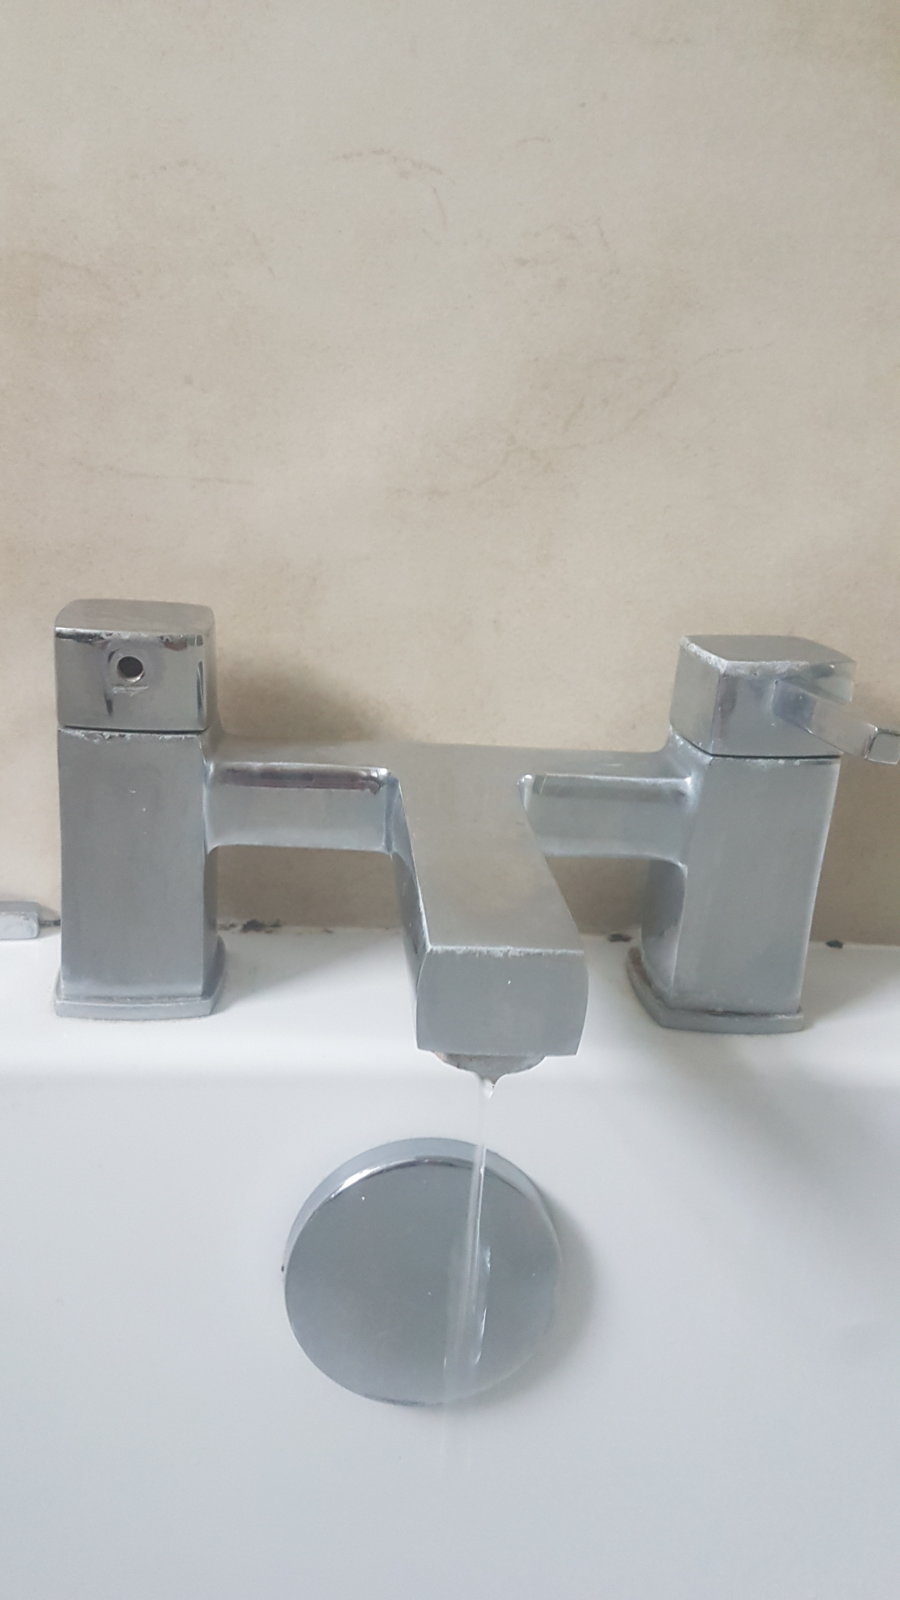 How To Remove Bath Tap Cartridge With, How To Change A Bathroom Tap Cartridge